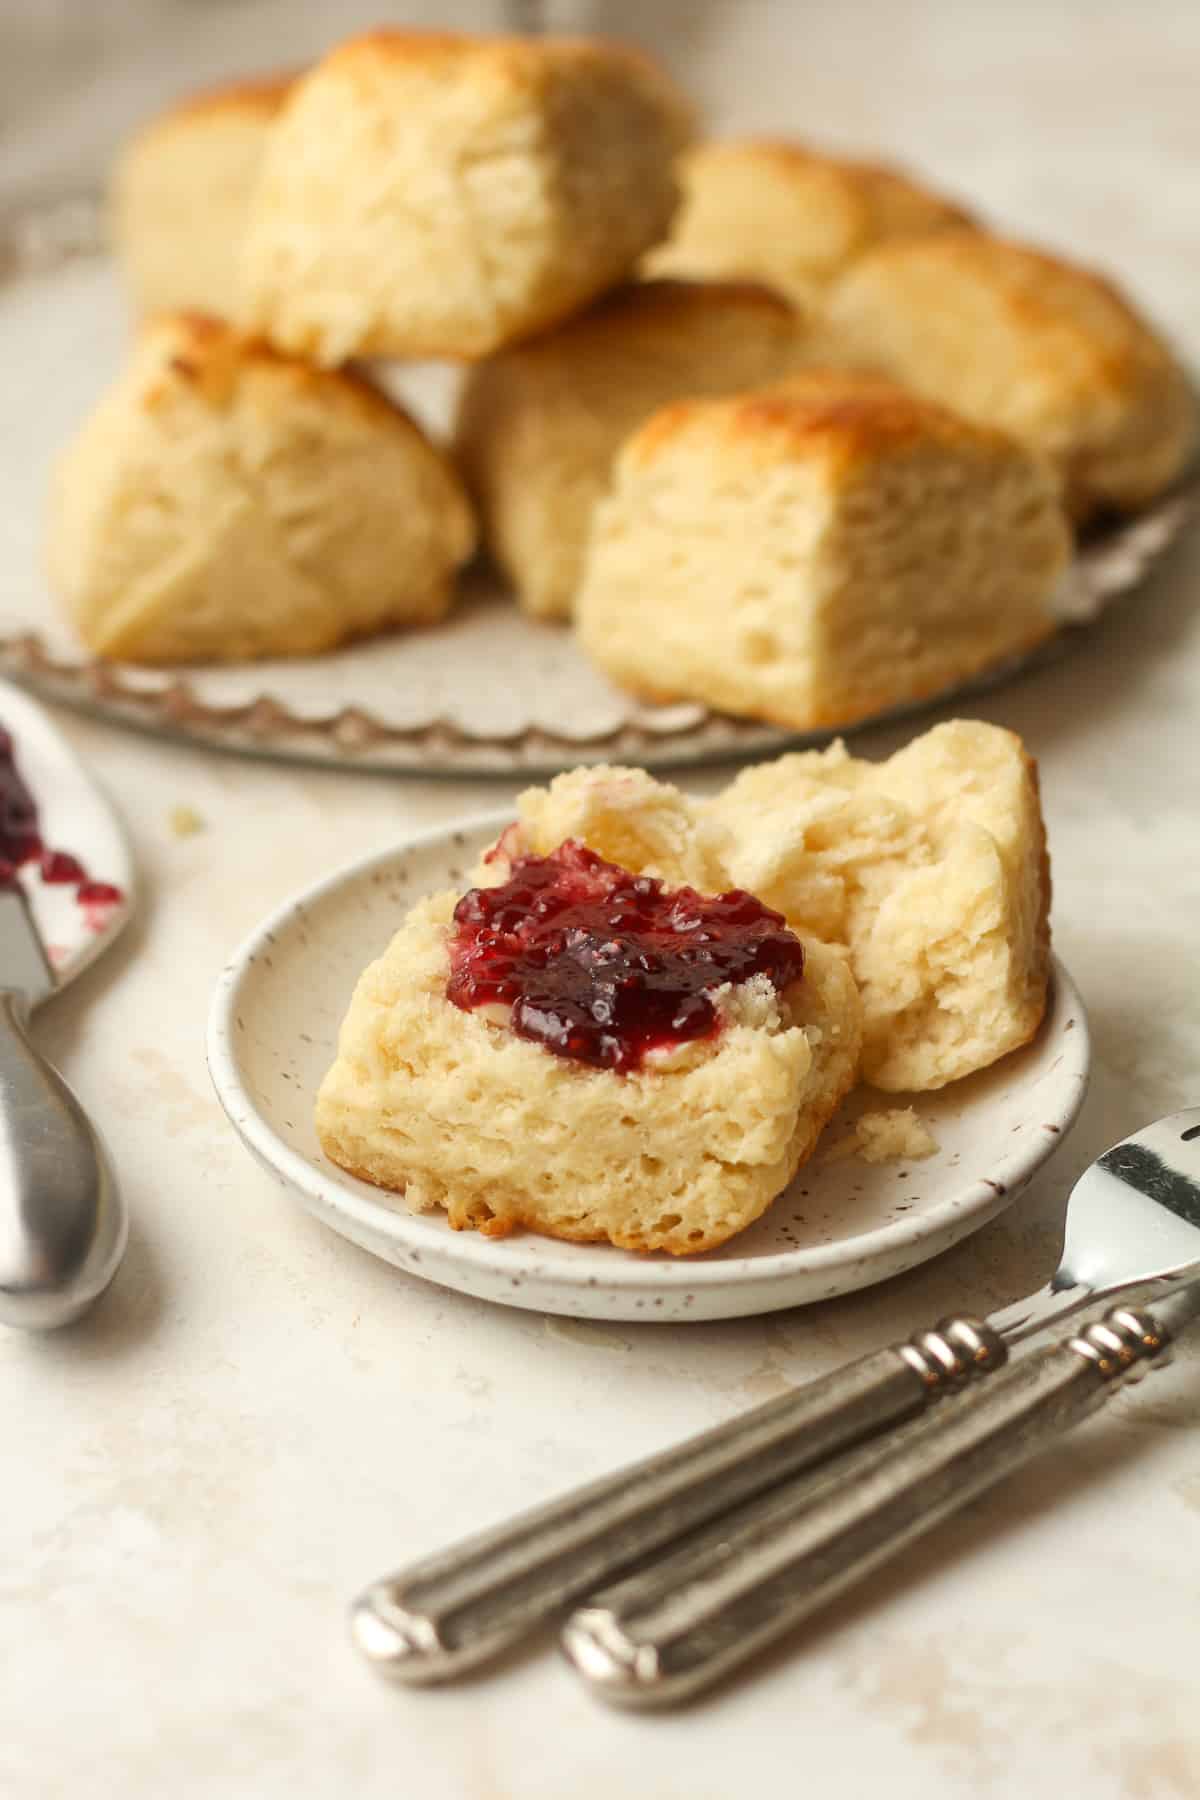 Side view of a biscuit with jam and a plate of biscuits in the background.